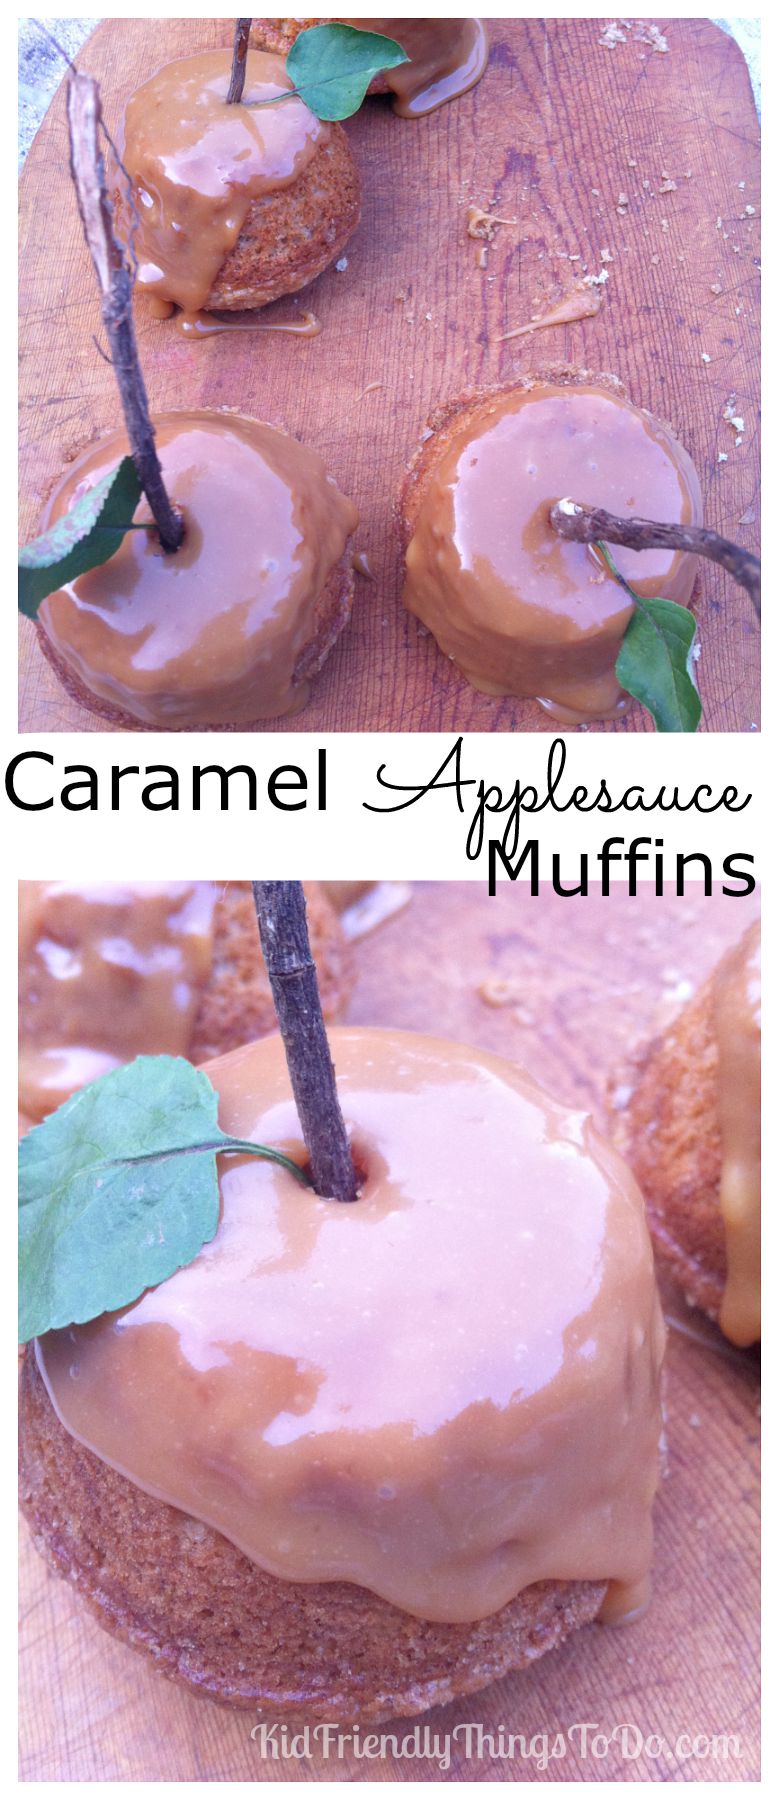 Easy Caramel Applesauce Spice Muffins Recipe. They look just as pretty as they are tasty! KidFriendlyThingsToDo.com